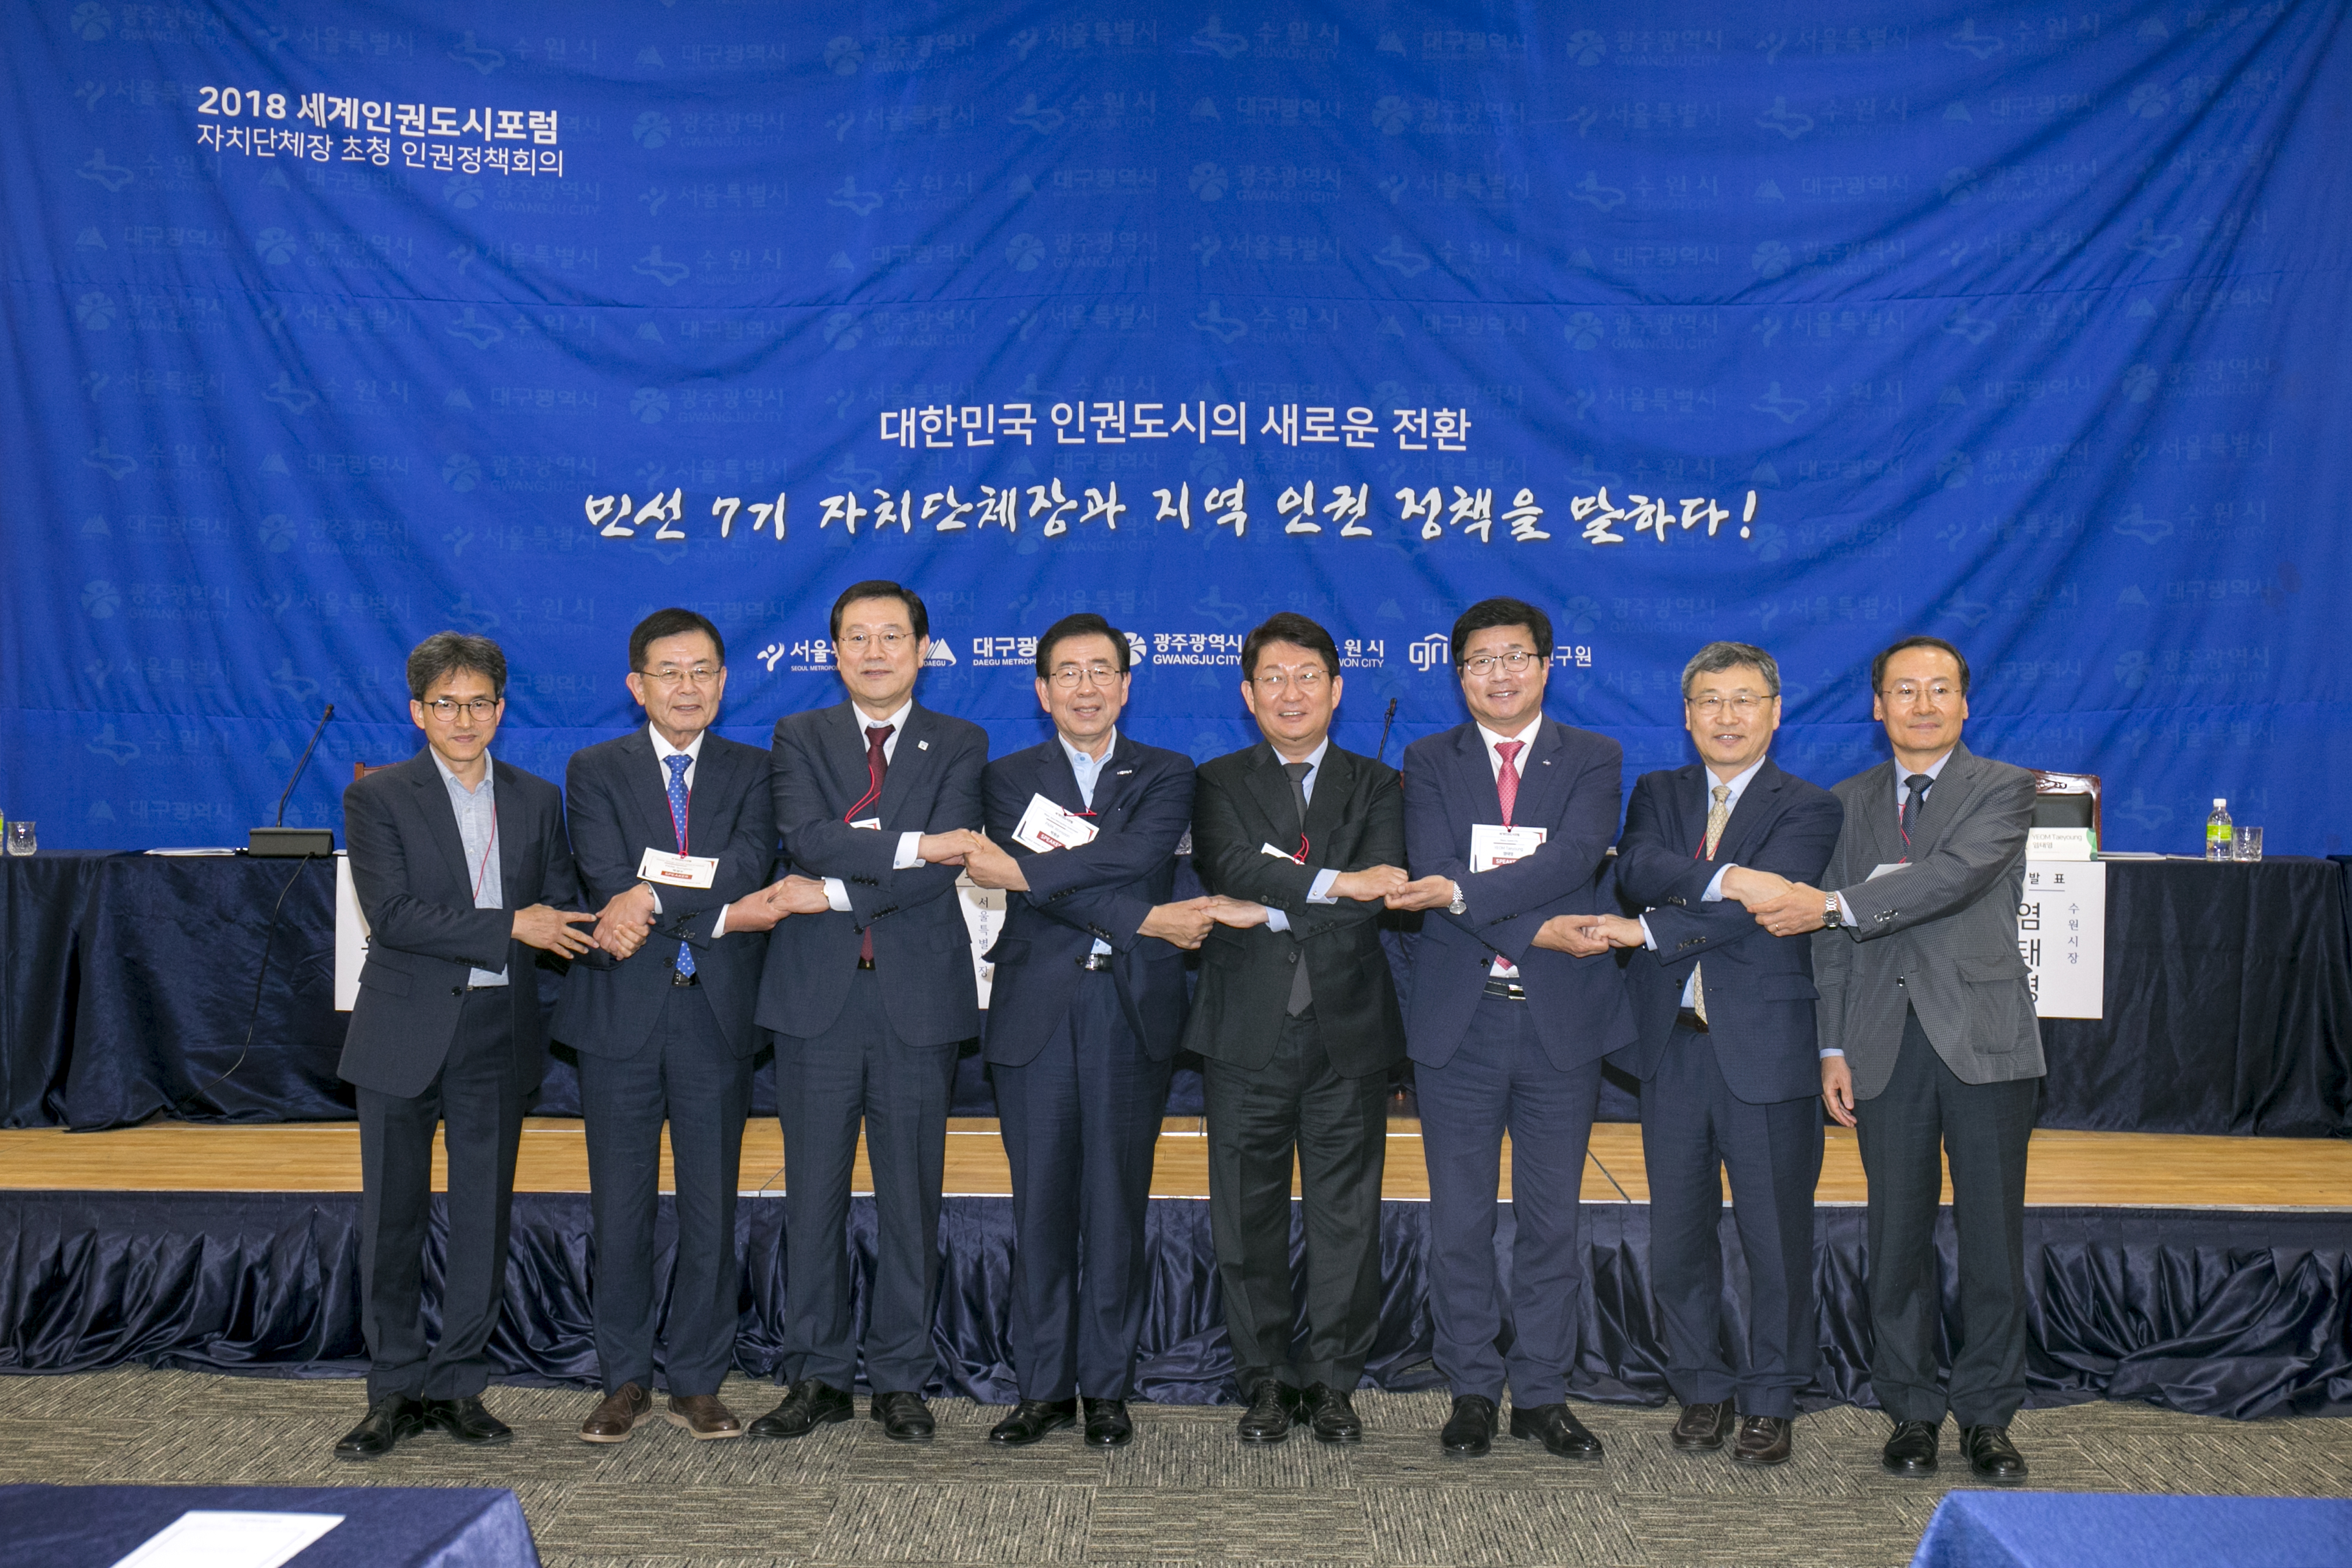 Gwangju Continues to Lead the Way for Human Rights and Peace in Asia